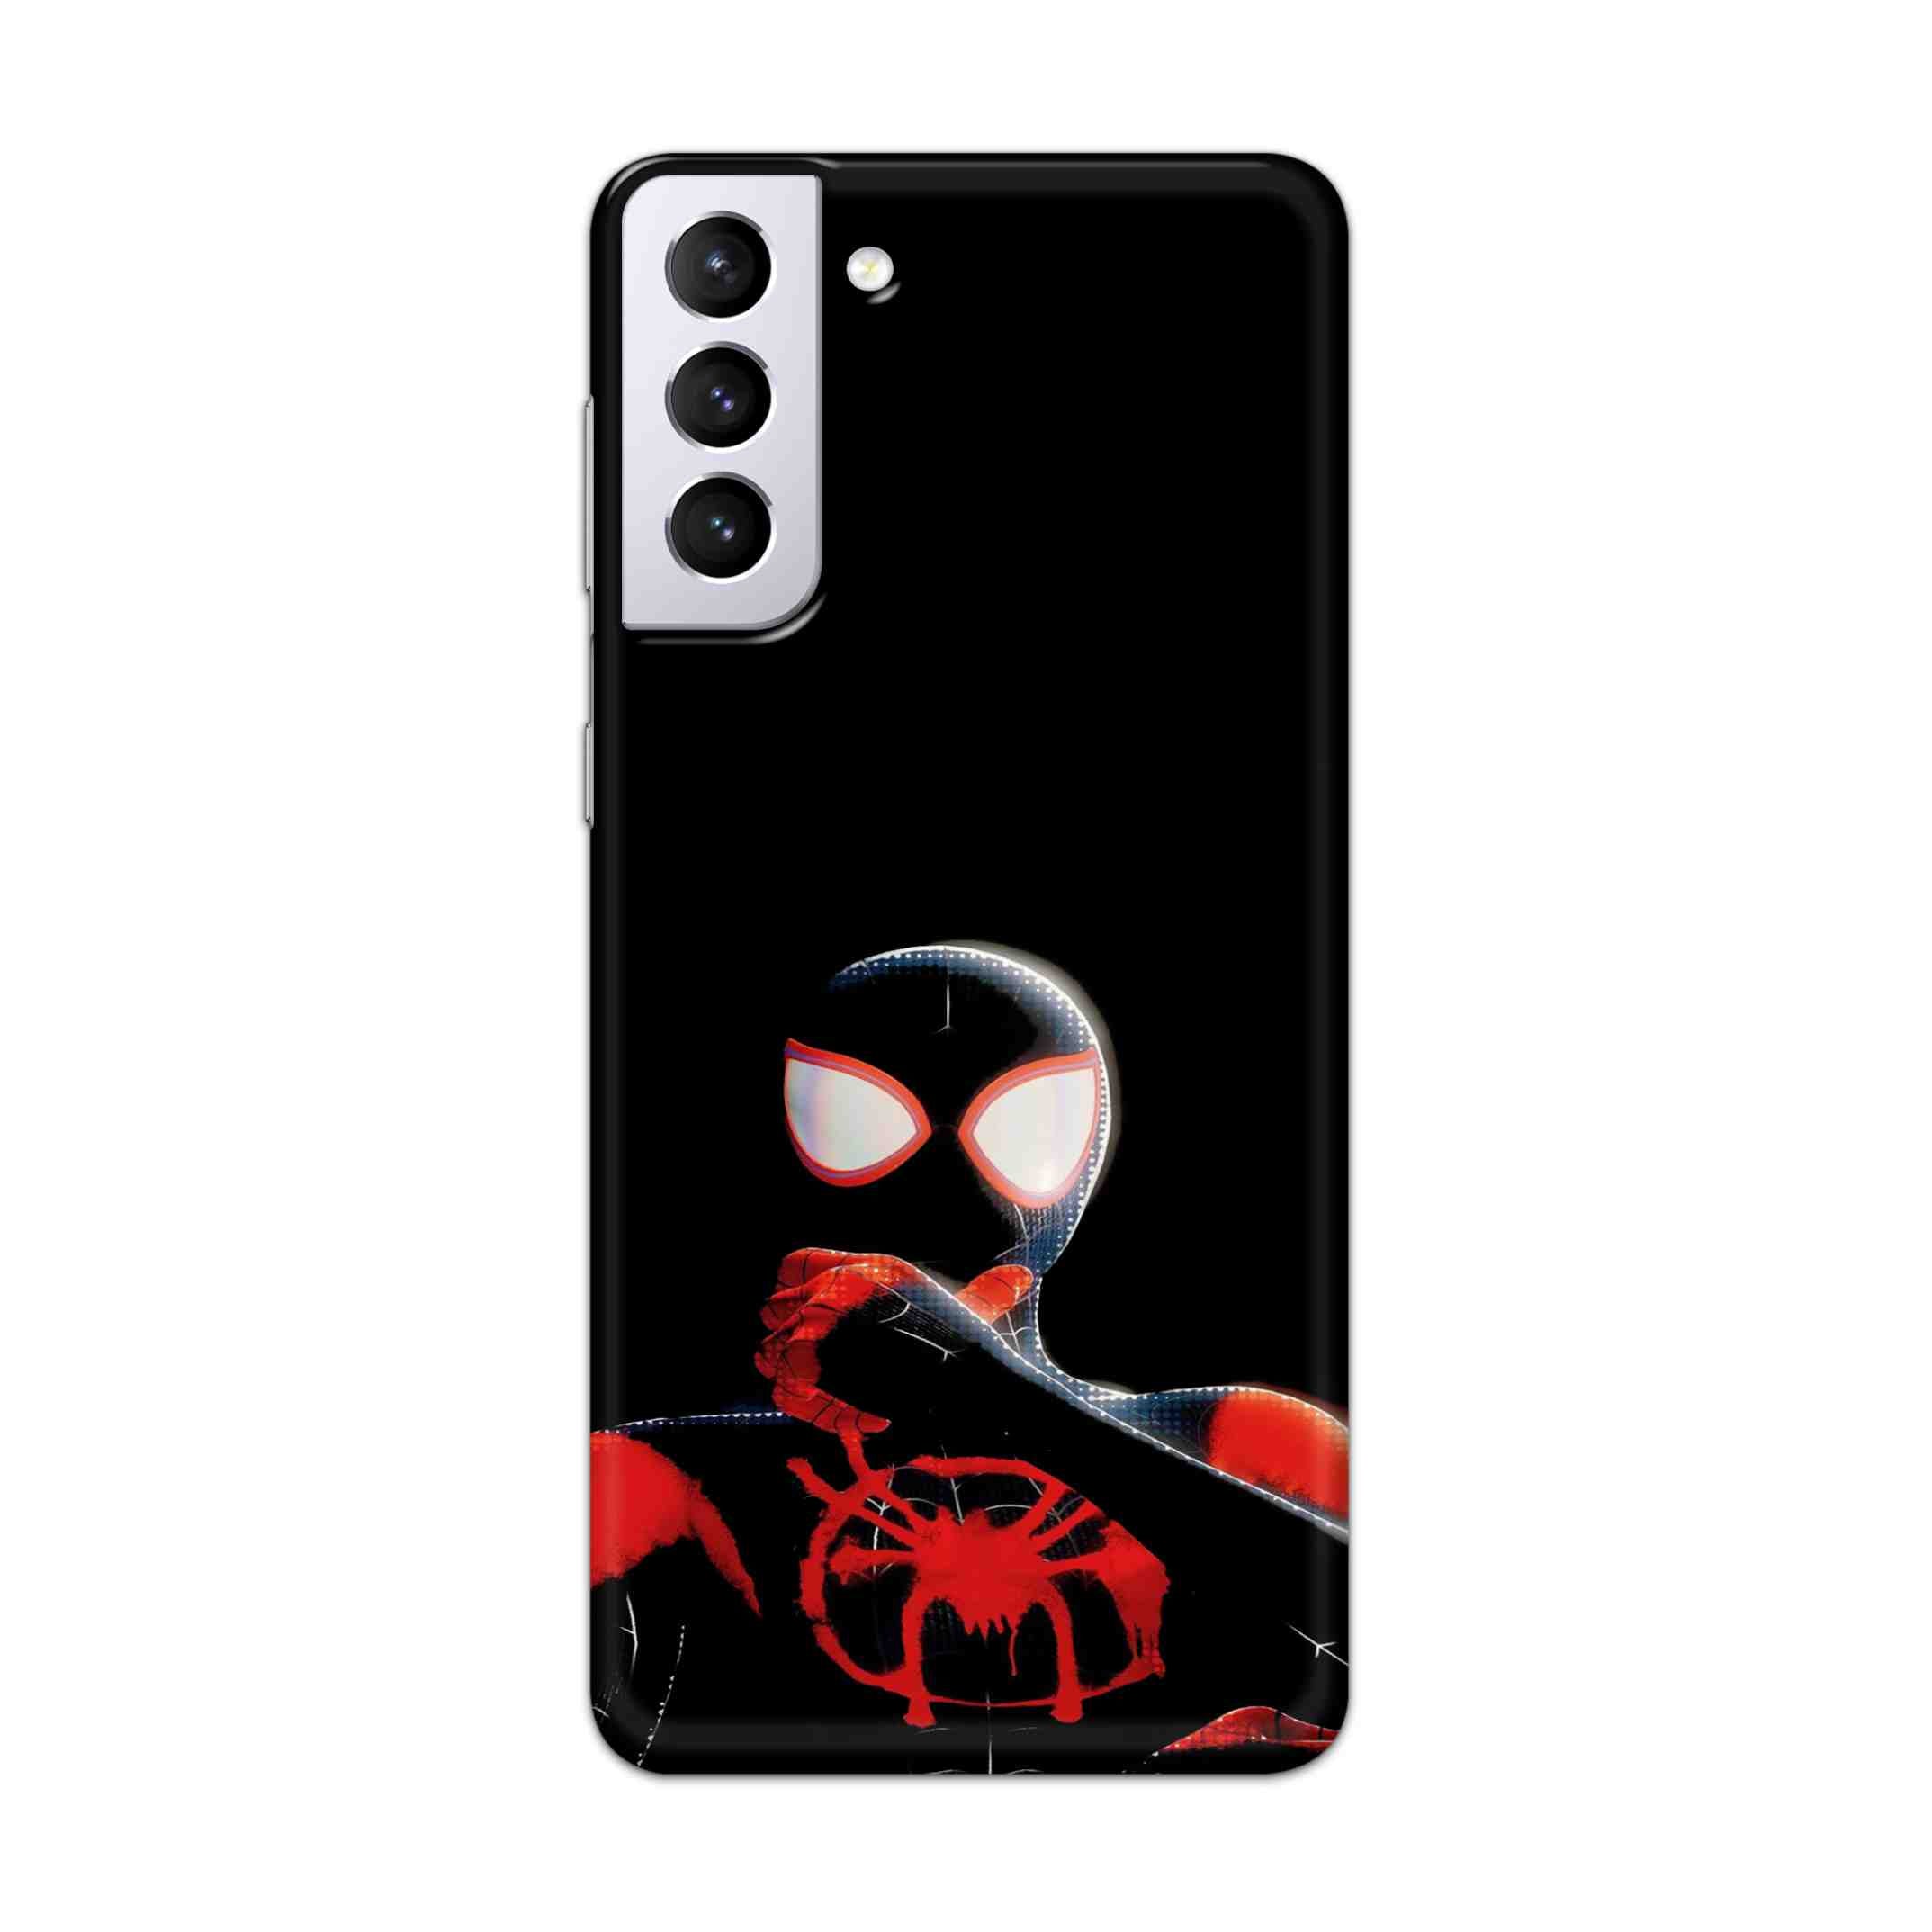 Buy Black Spiderman Hard Back Mobile Phone Case Cover For Samsung Galaxy S21 Online